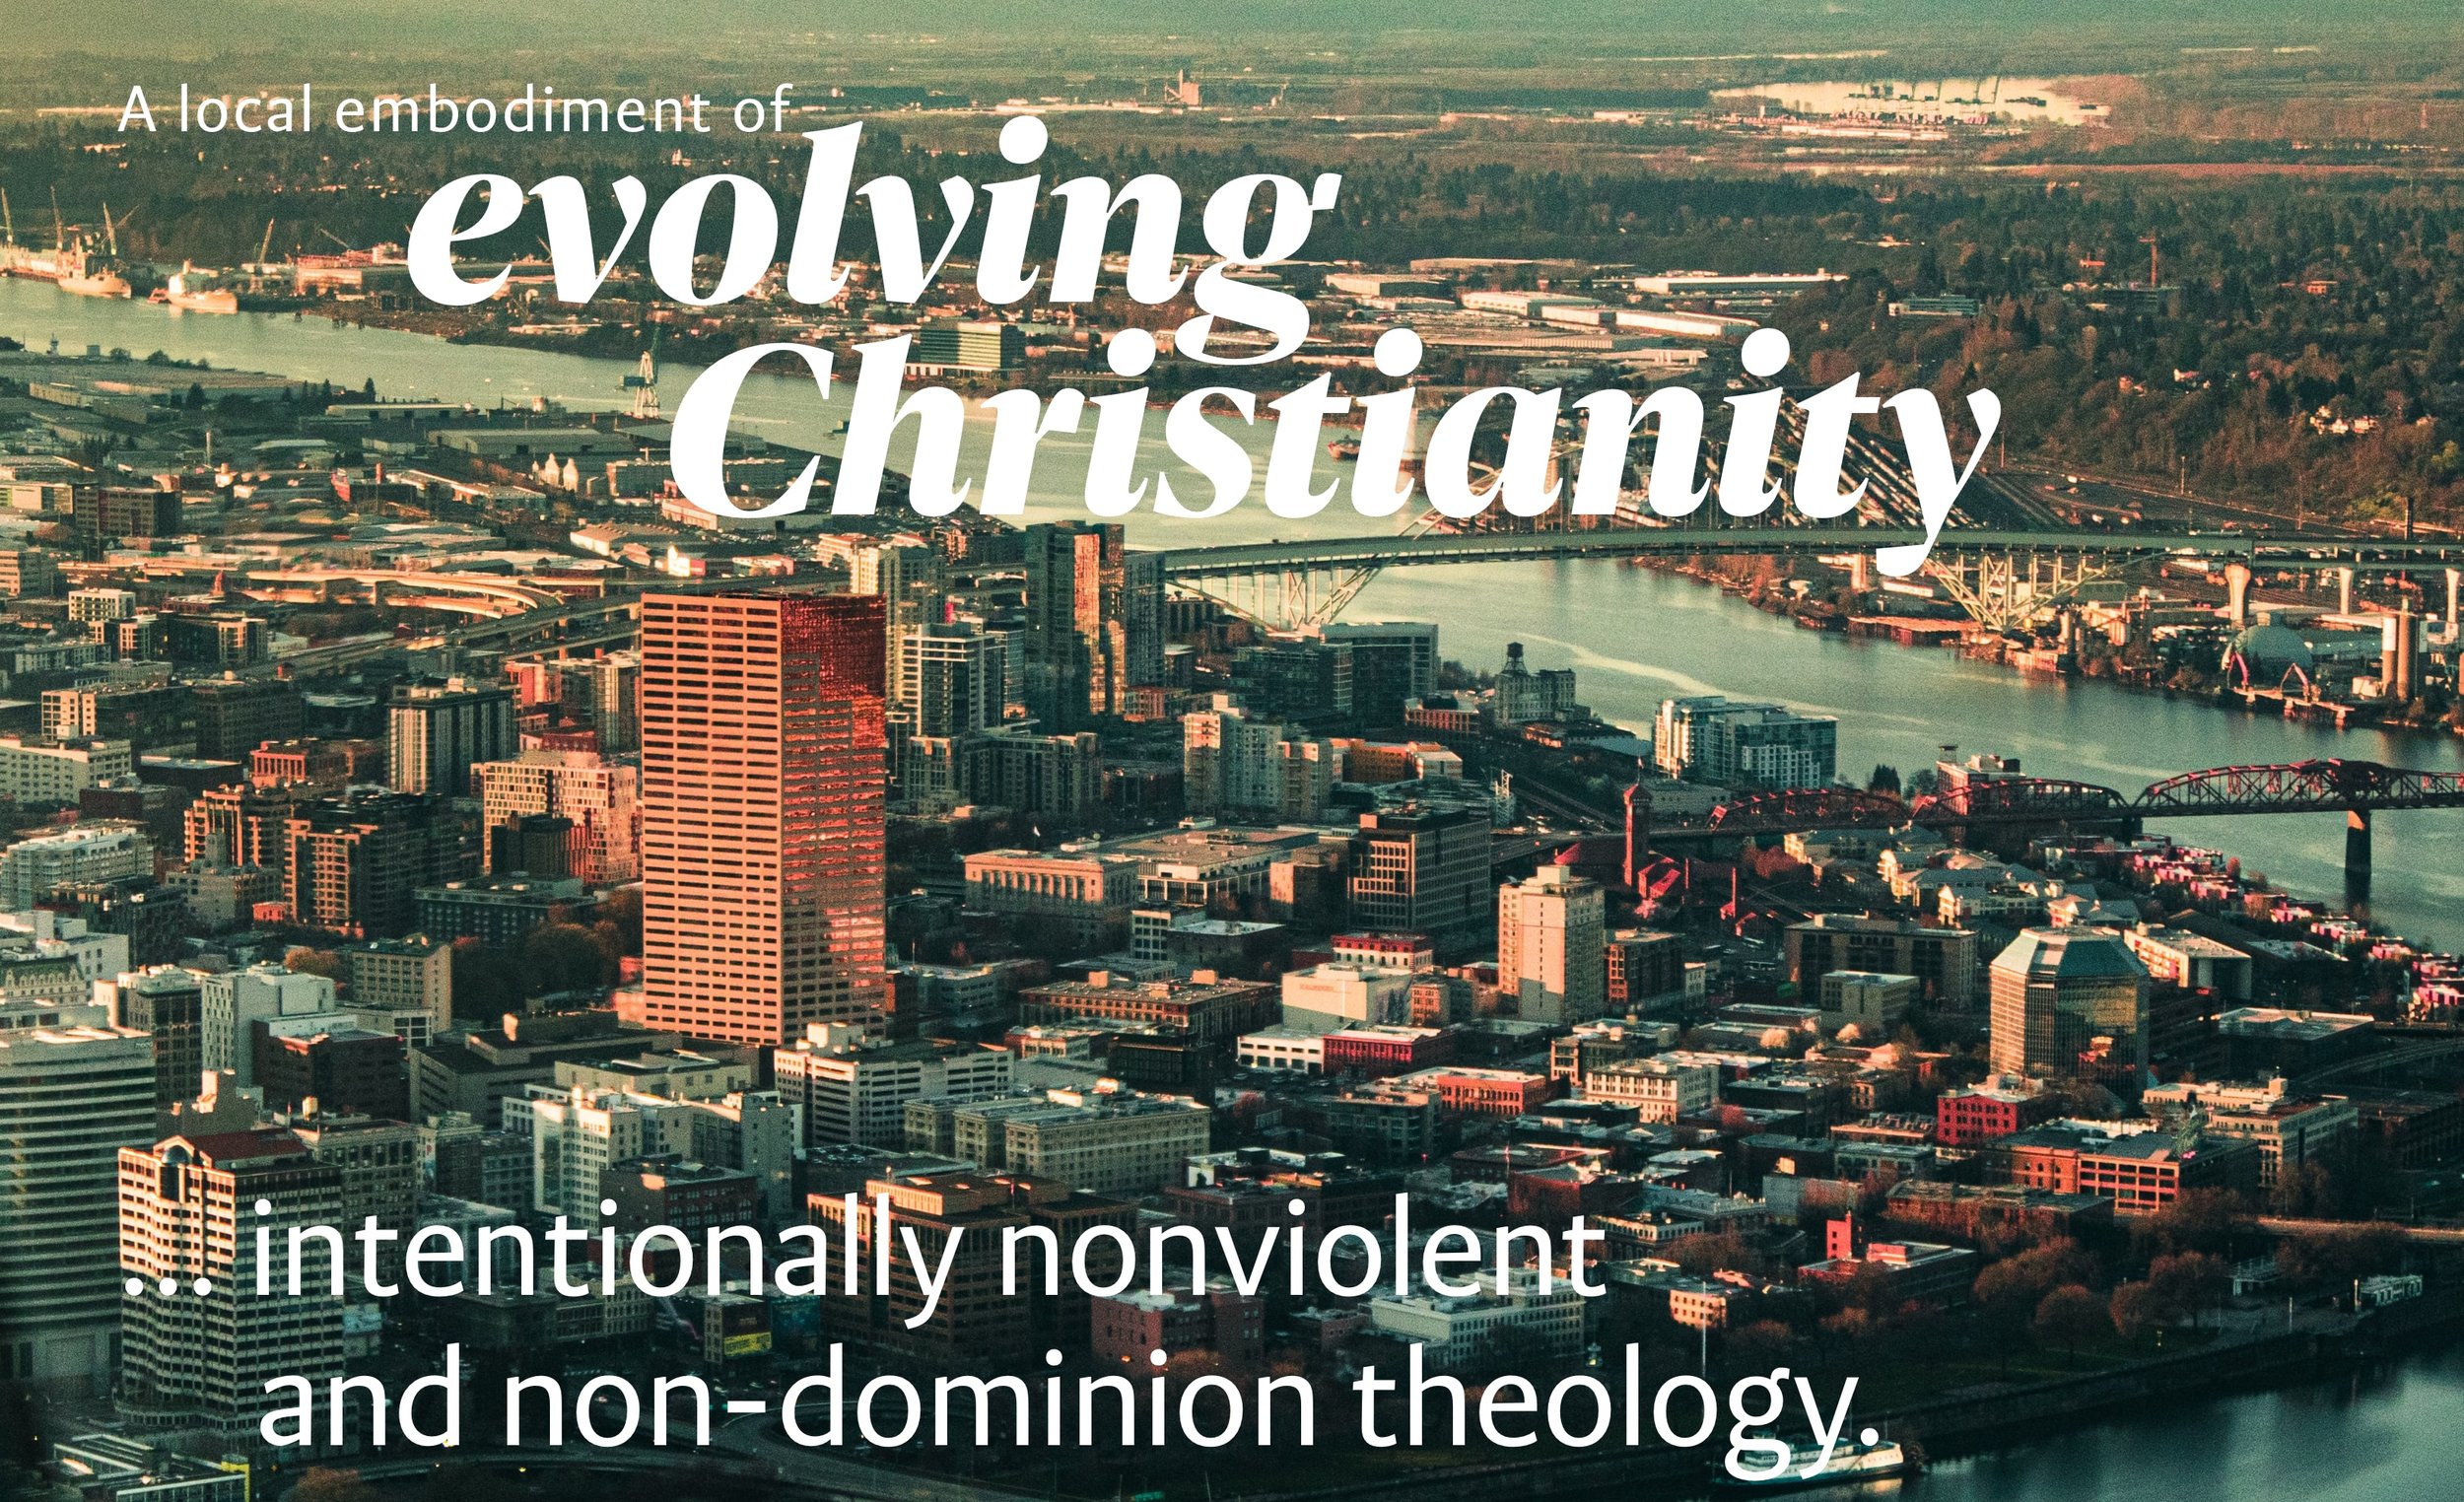  Intentionally nonviolent and non-dominion theology. 